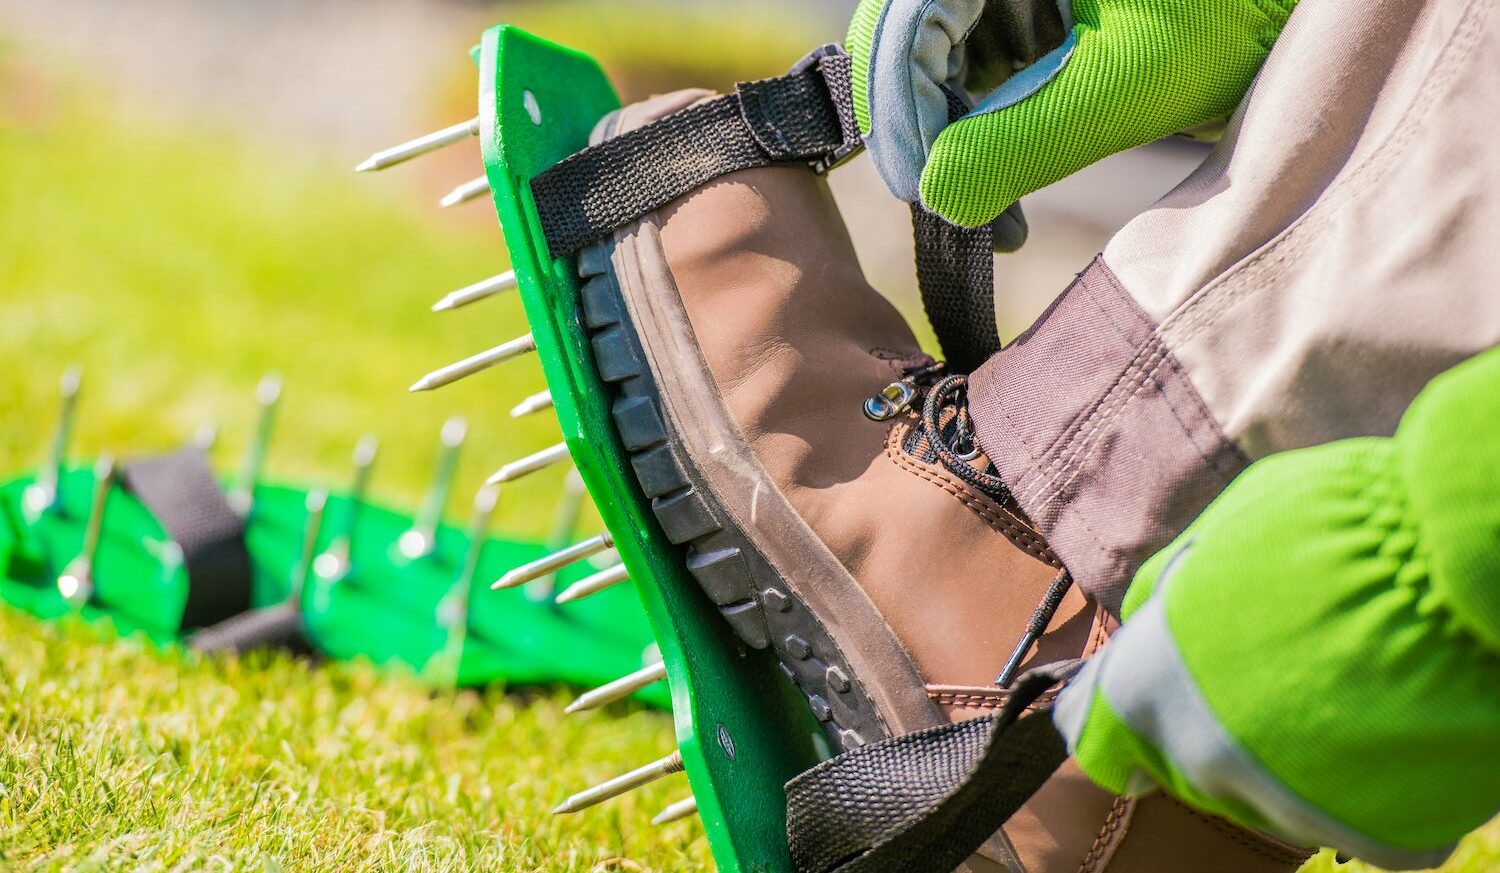 Aerating your lawn – everything you need to know (including tips & tricks!)